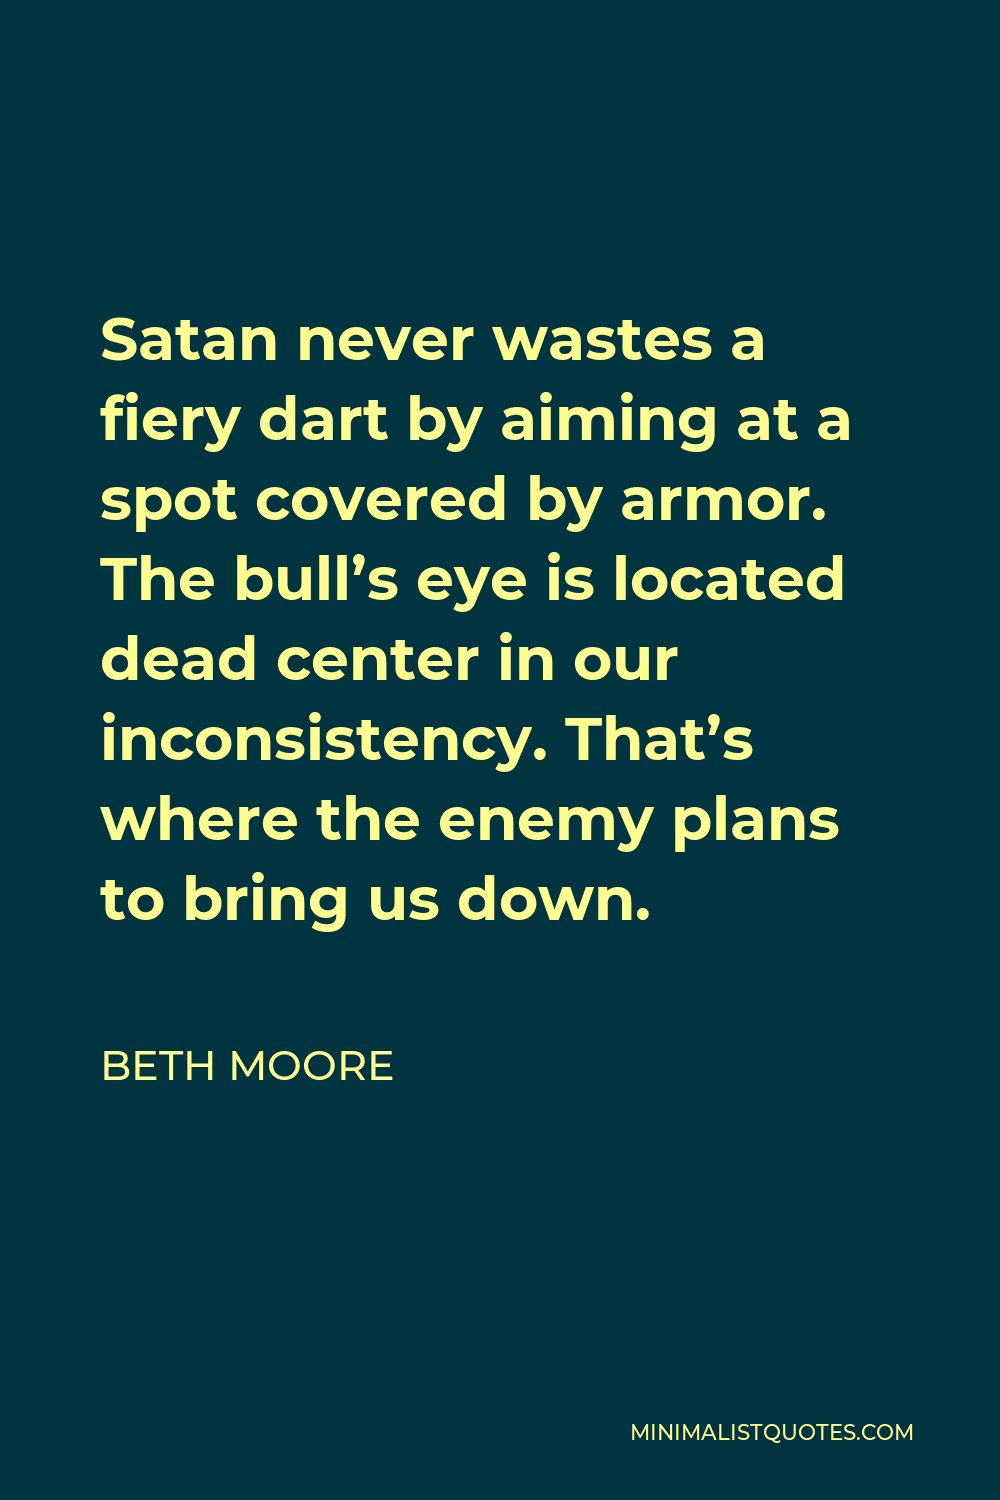 Beth Moore Quote - Satan never wastes a fiery dart by aiming at a spot covered by armor. The bull’s eye is located dead center in our inconsistency. That’s where the enemy plans to bring us down.